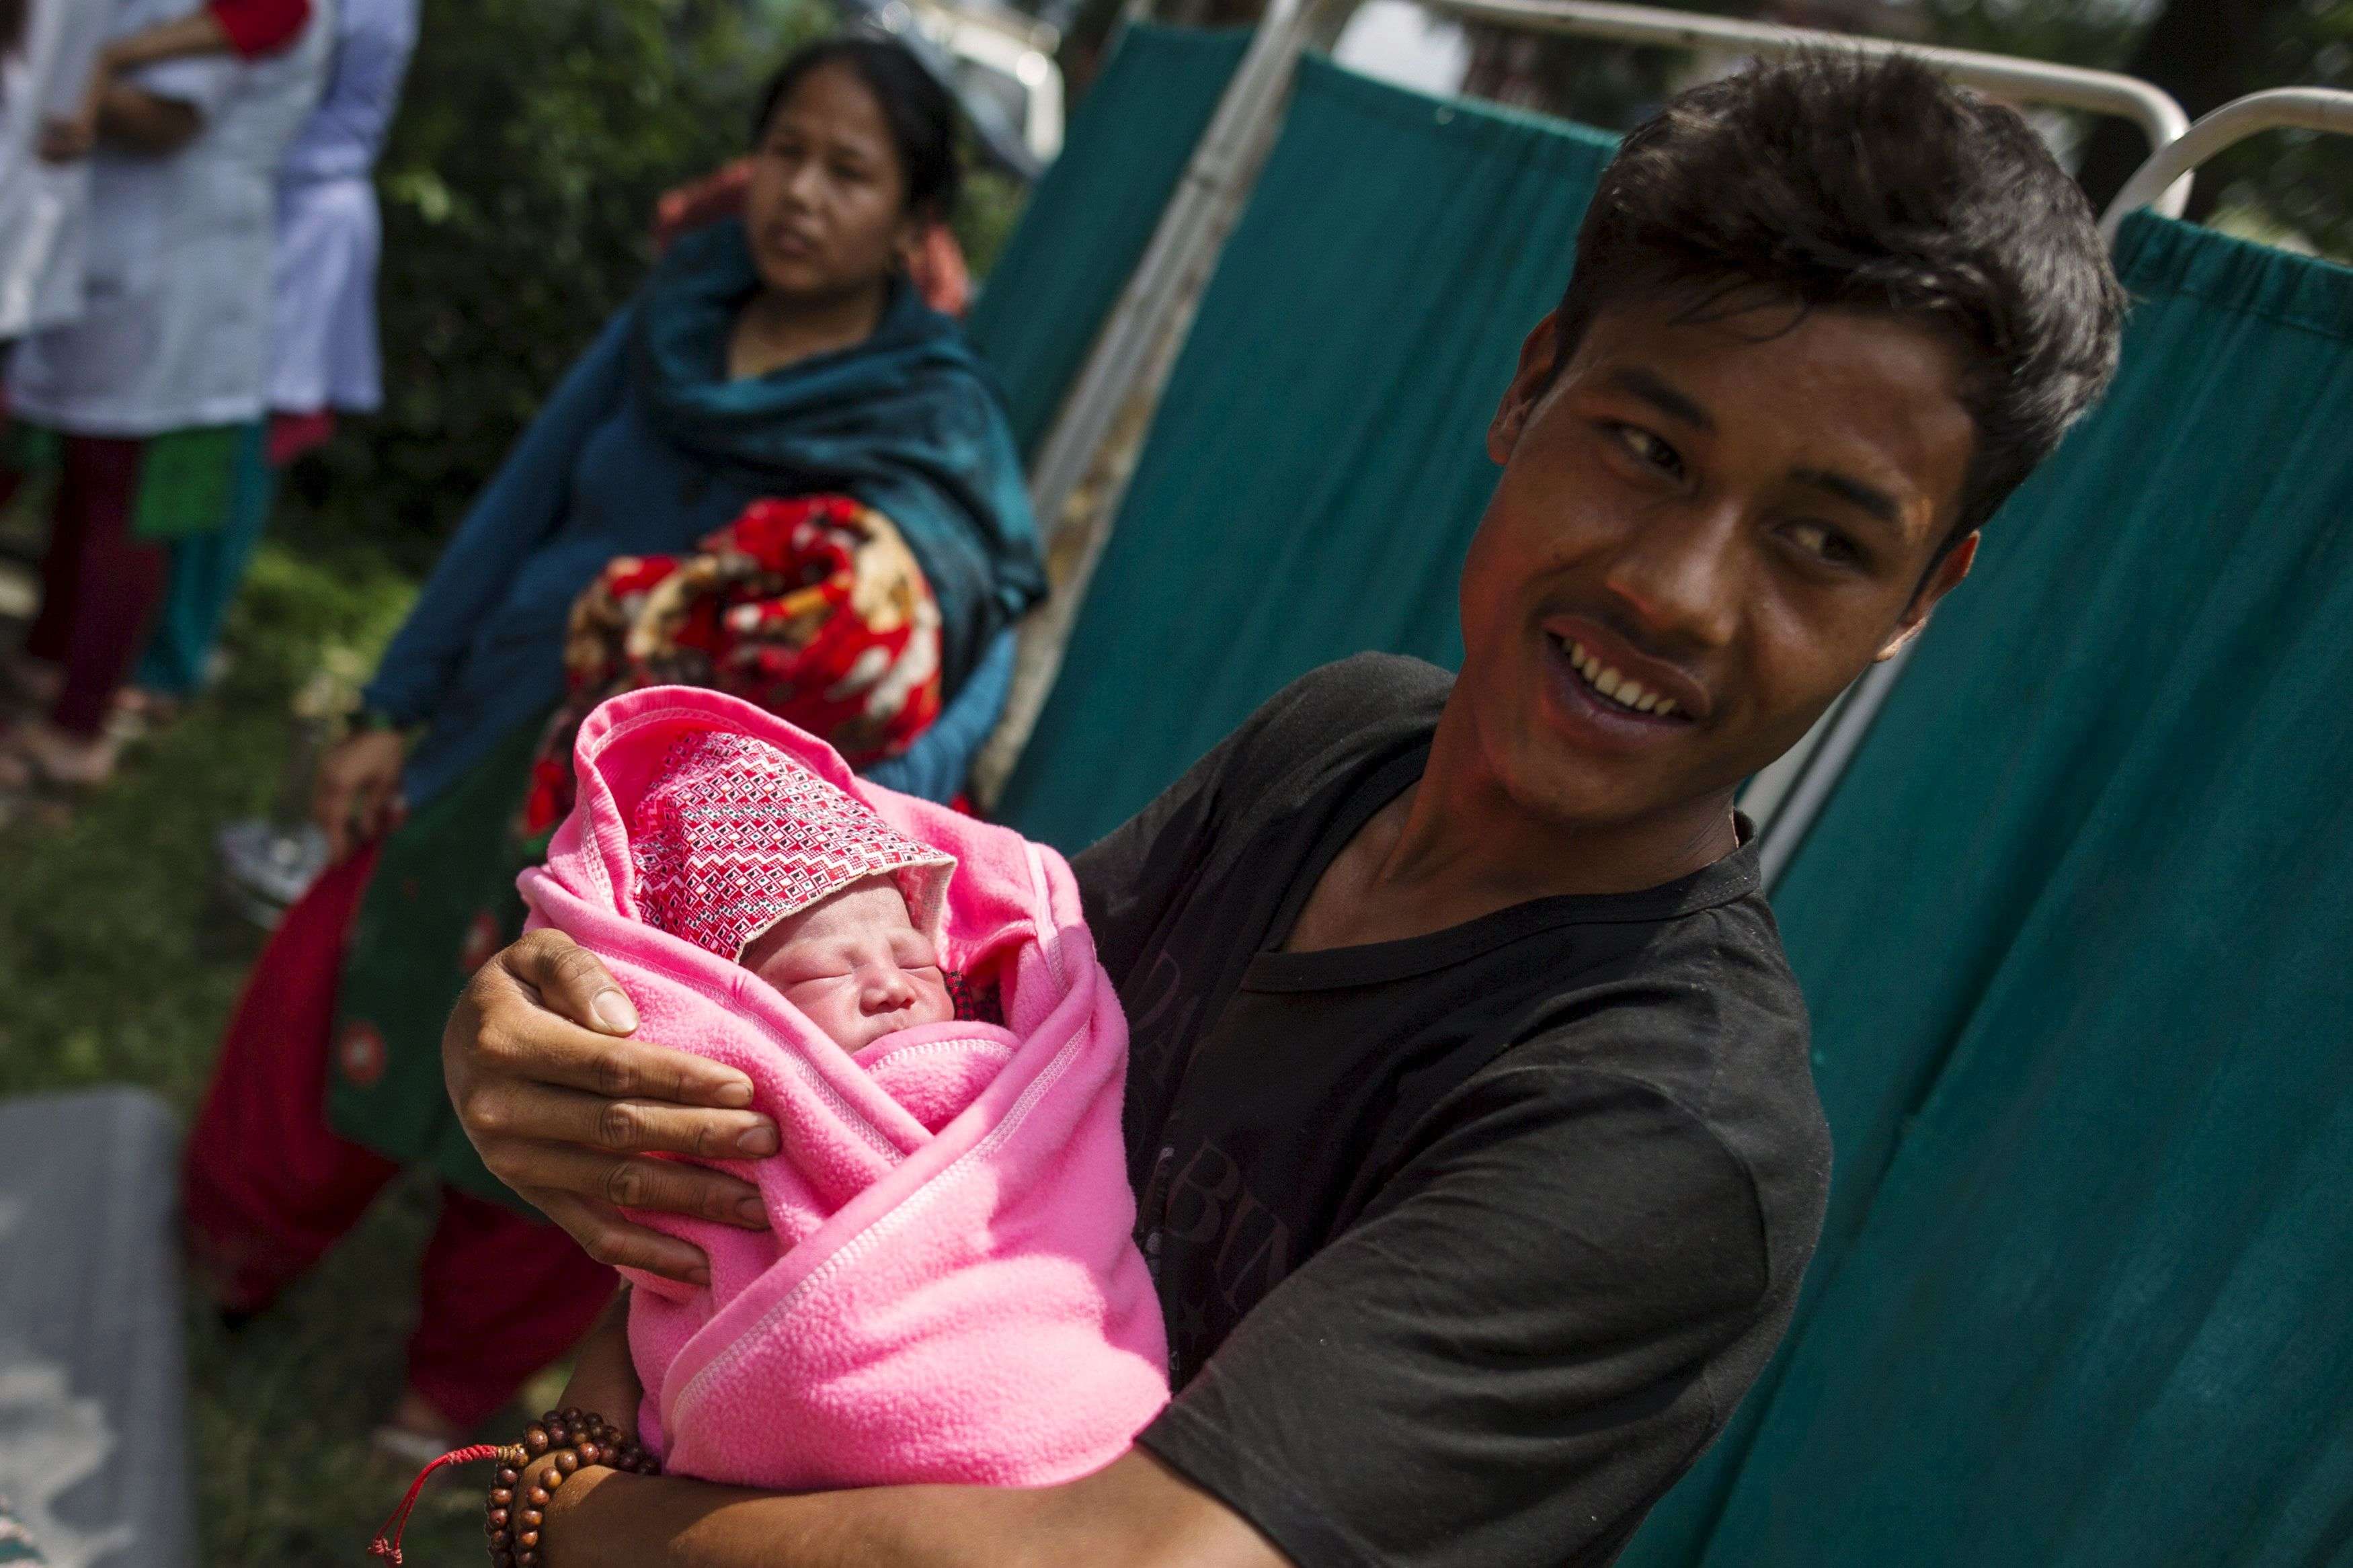 A Picture and Its Story: "Nepal - Birth Amid The Ruins"